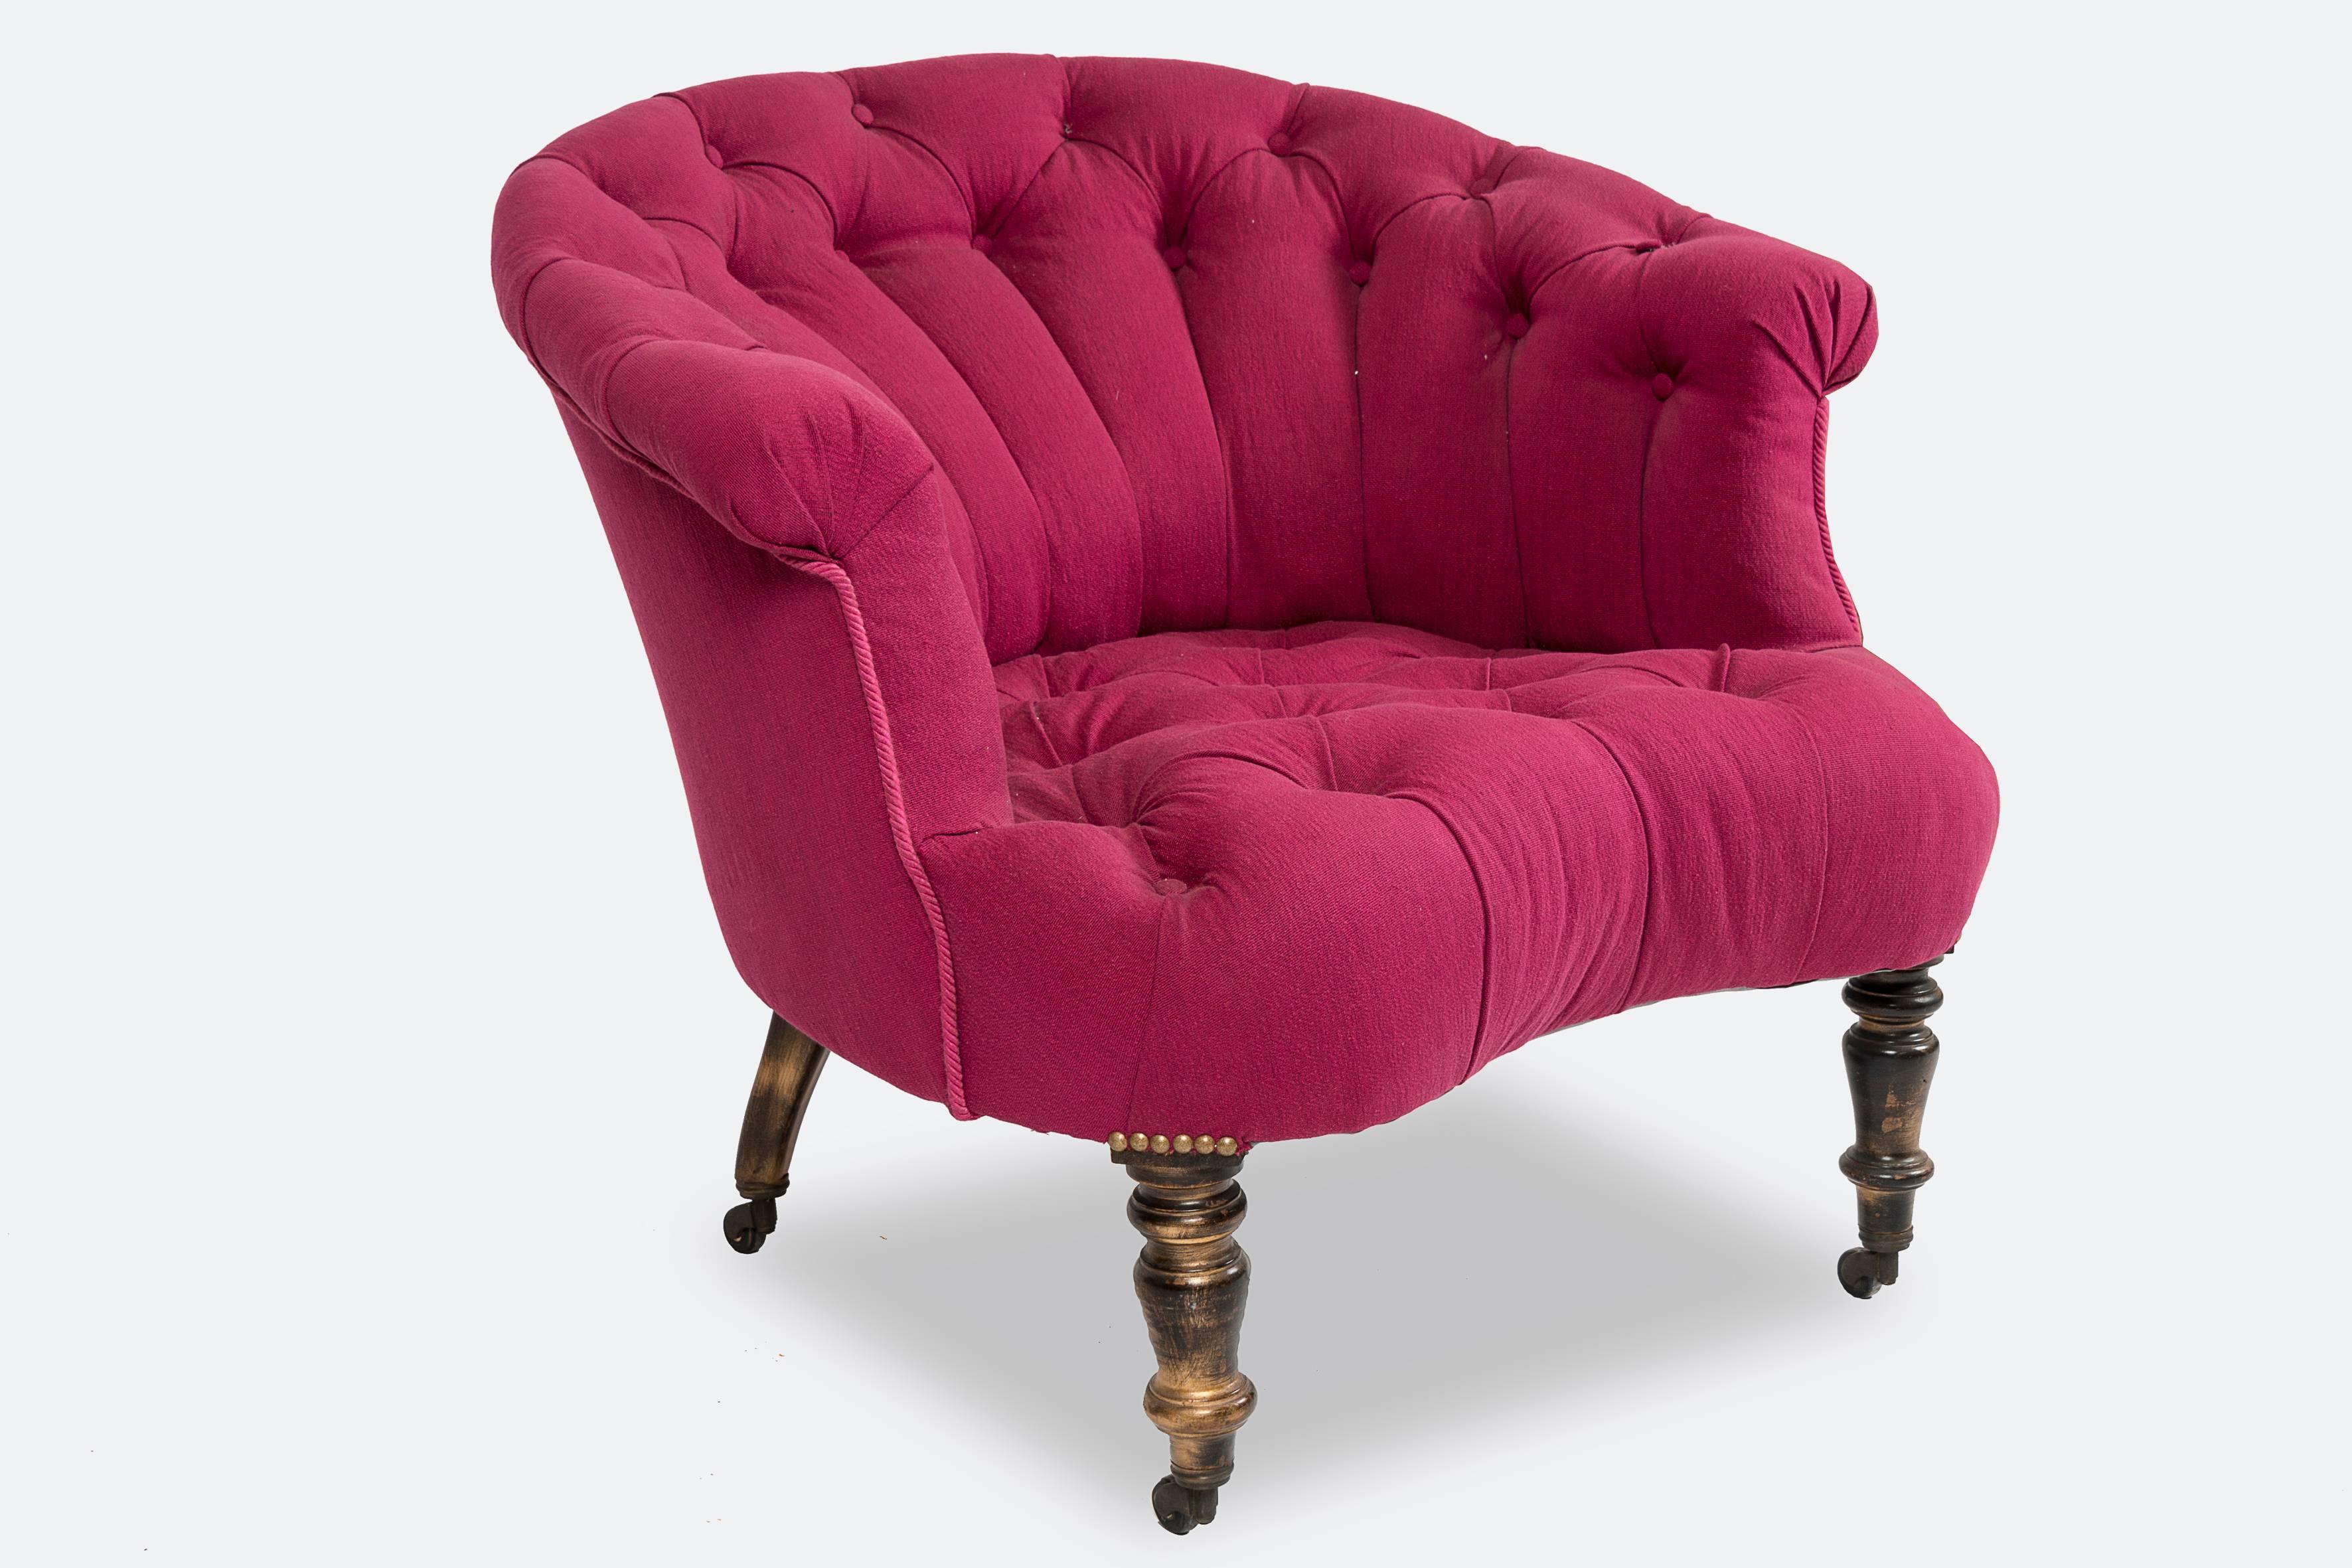 Pair of Napoleon III padded armchairs, legs ending with castors, fuschia colored fabric, padded style.